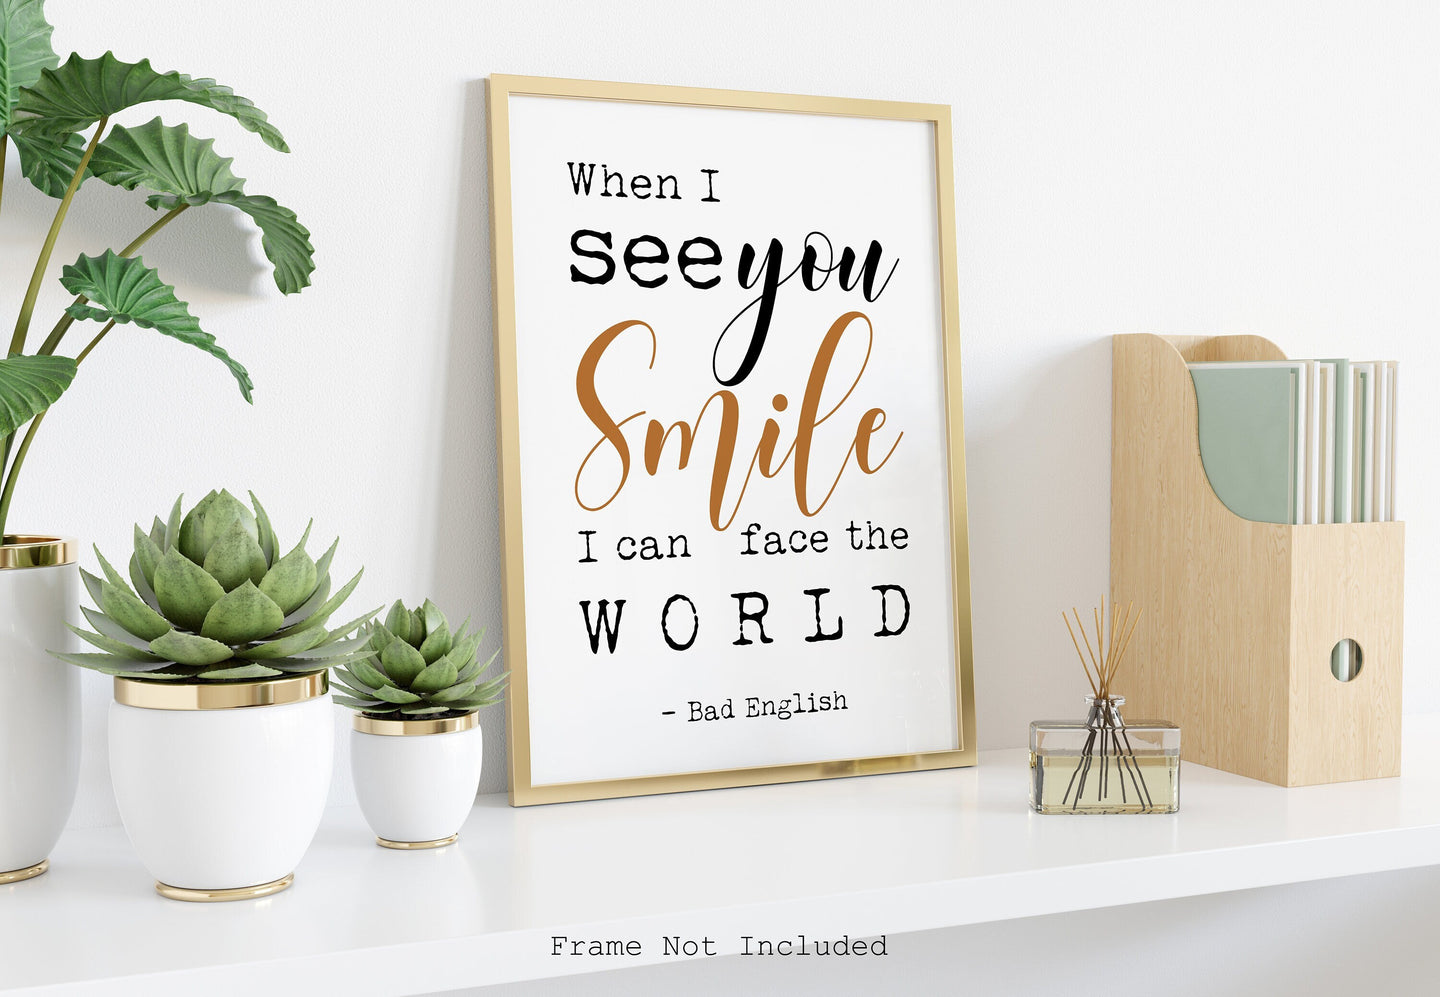 Bad English lyrics poster - When I see you smile I can face the world - Music Print bedroom decor record poster UNFRAMED